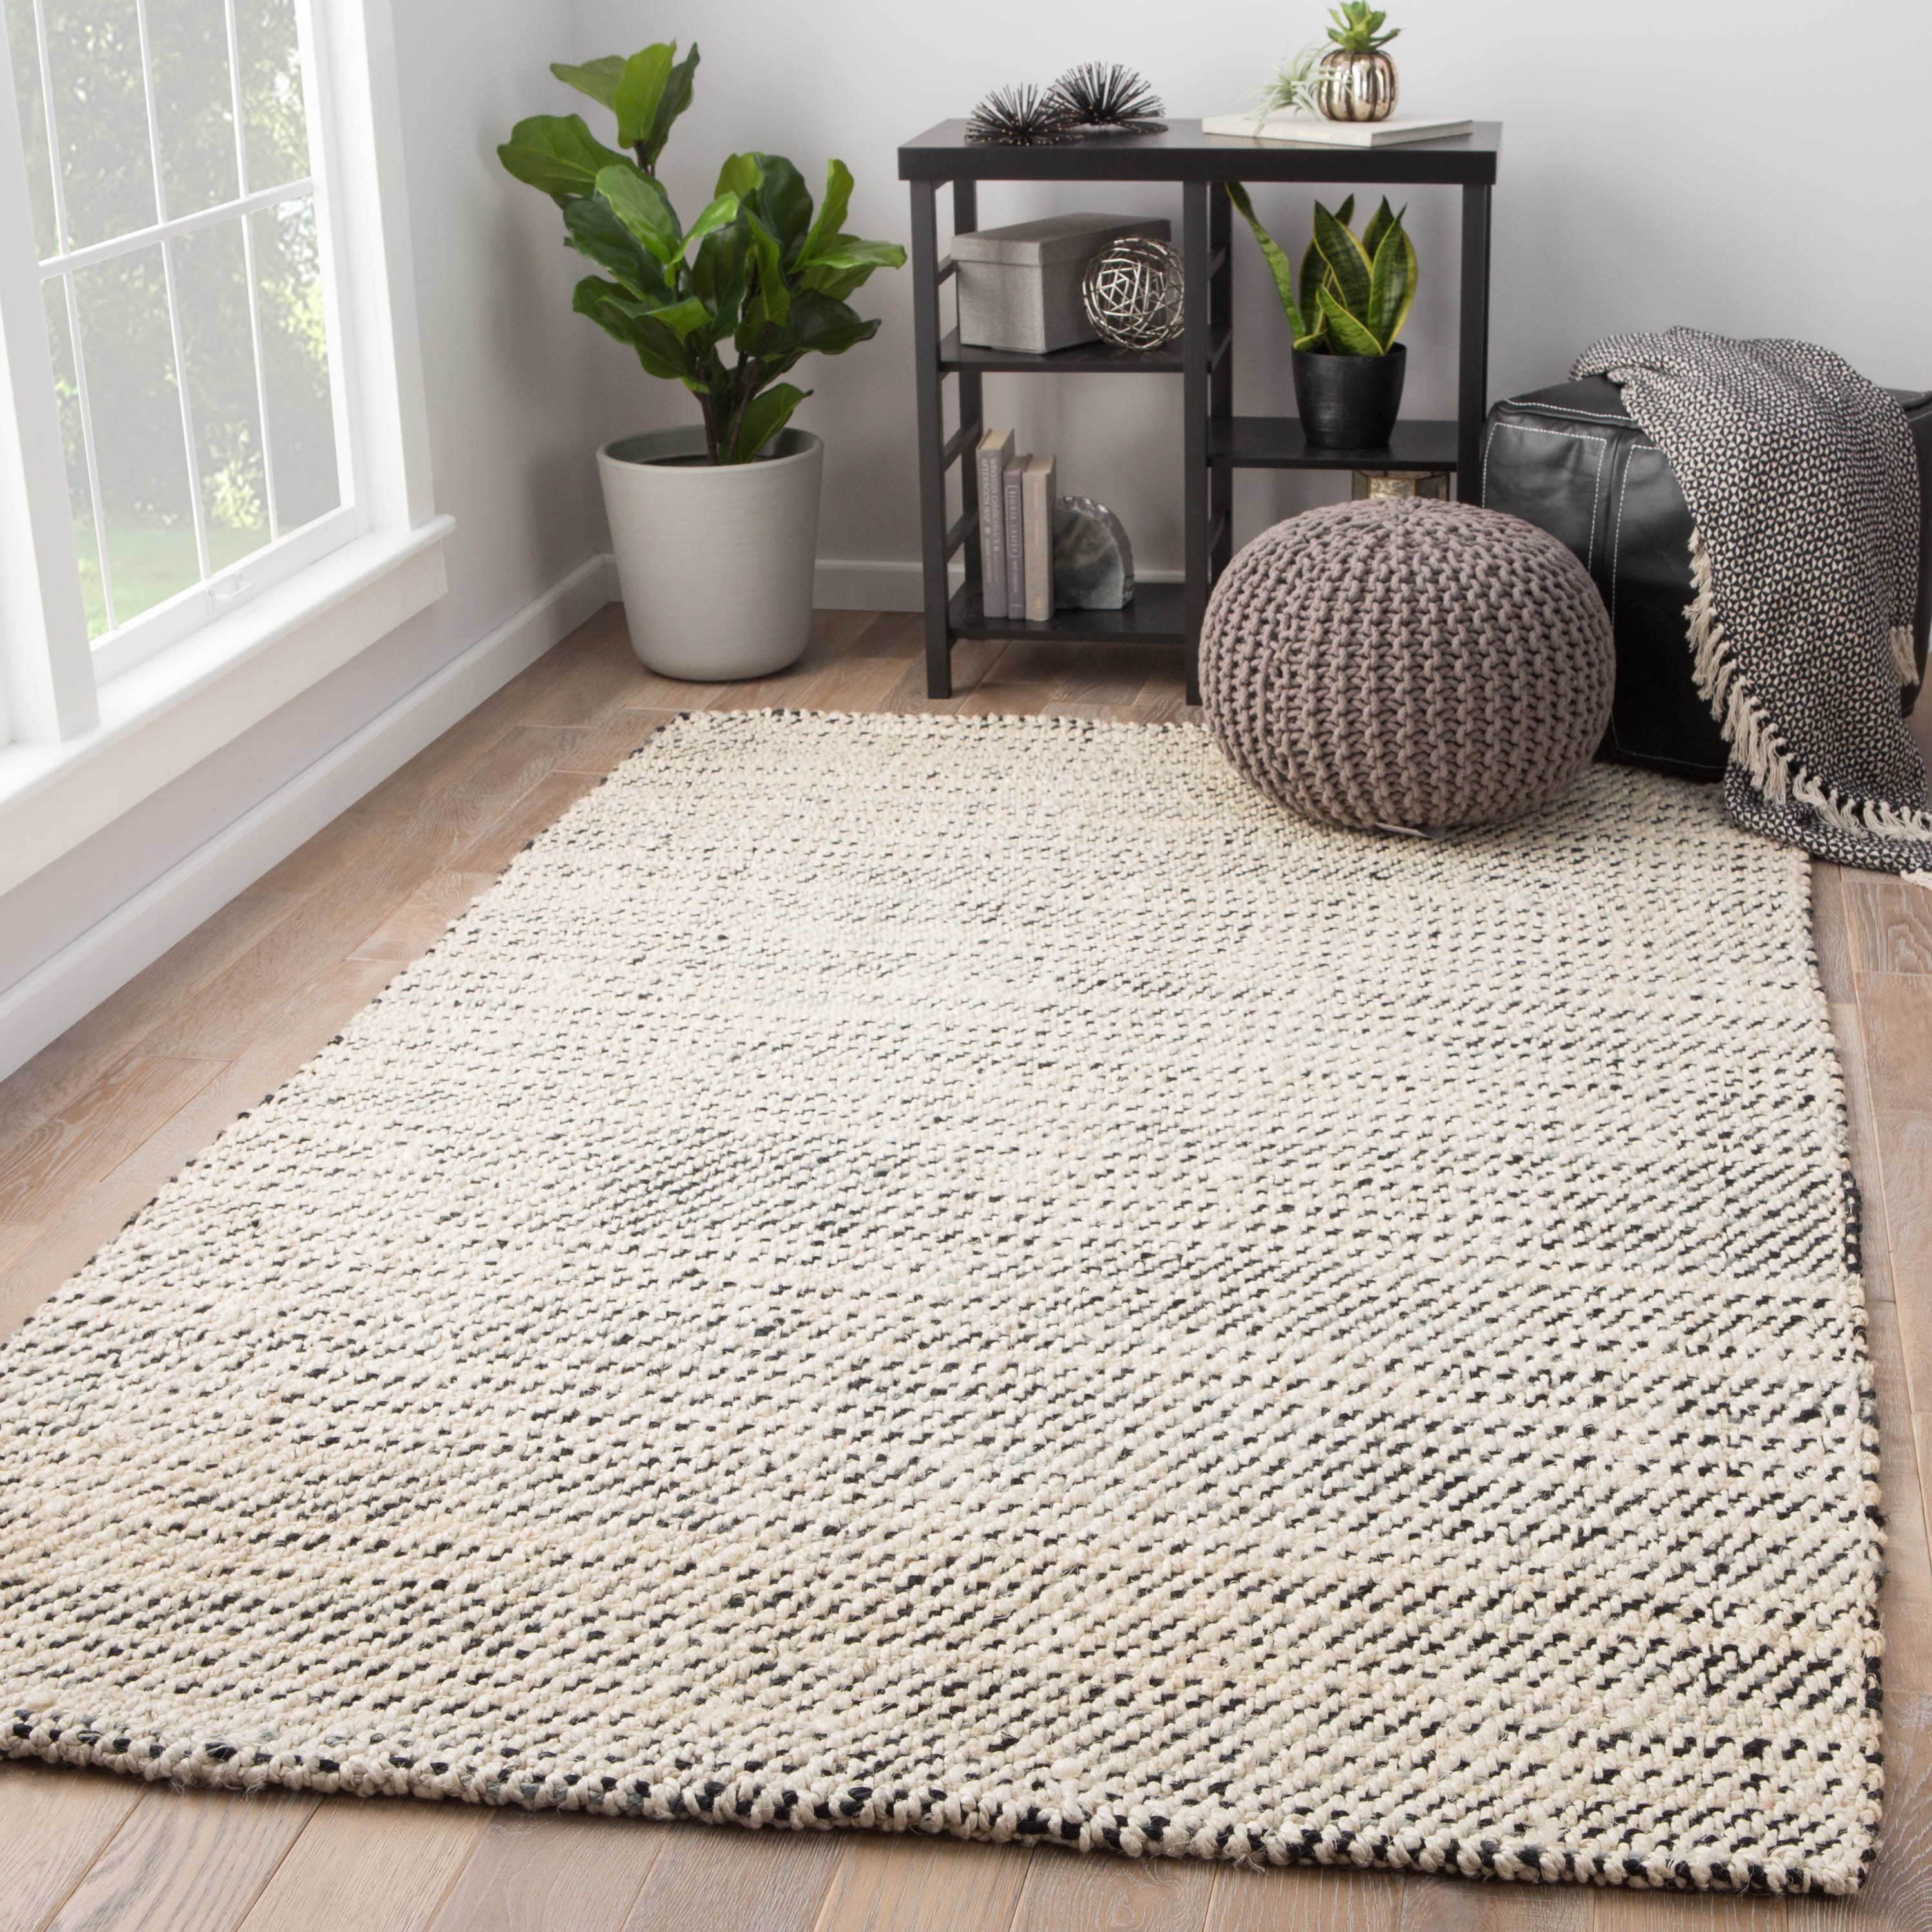 Almand Natural Solid White/ Black Area Rug (9' X 12') - Image 4